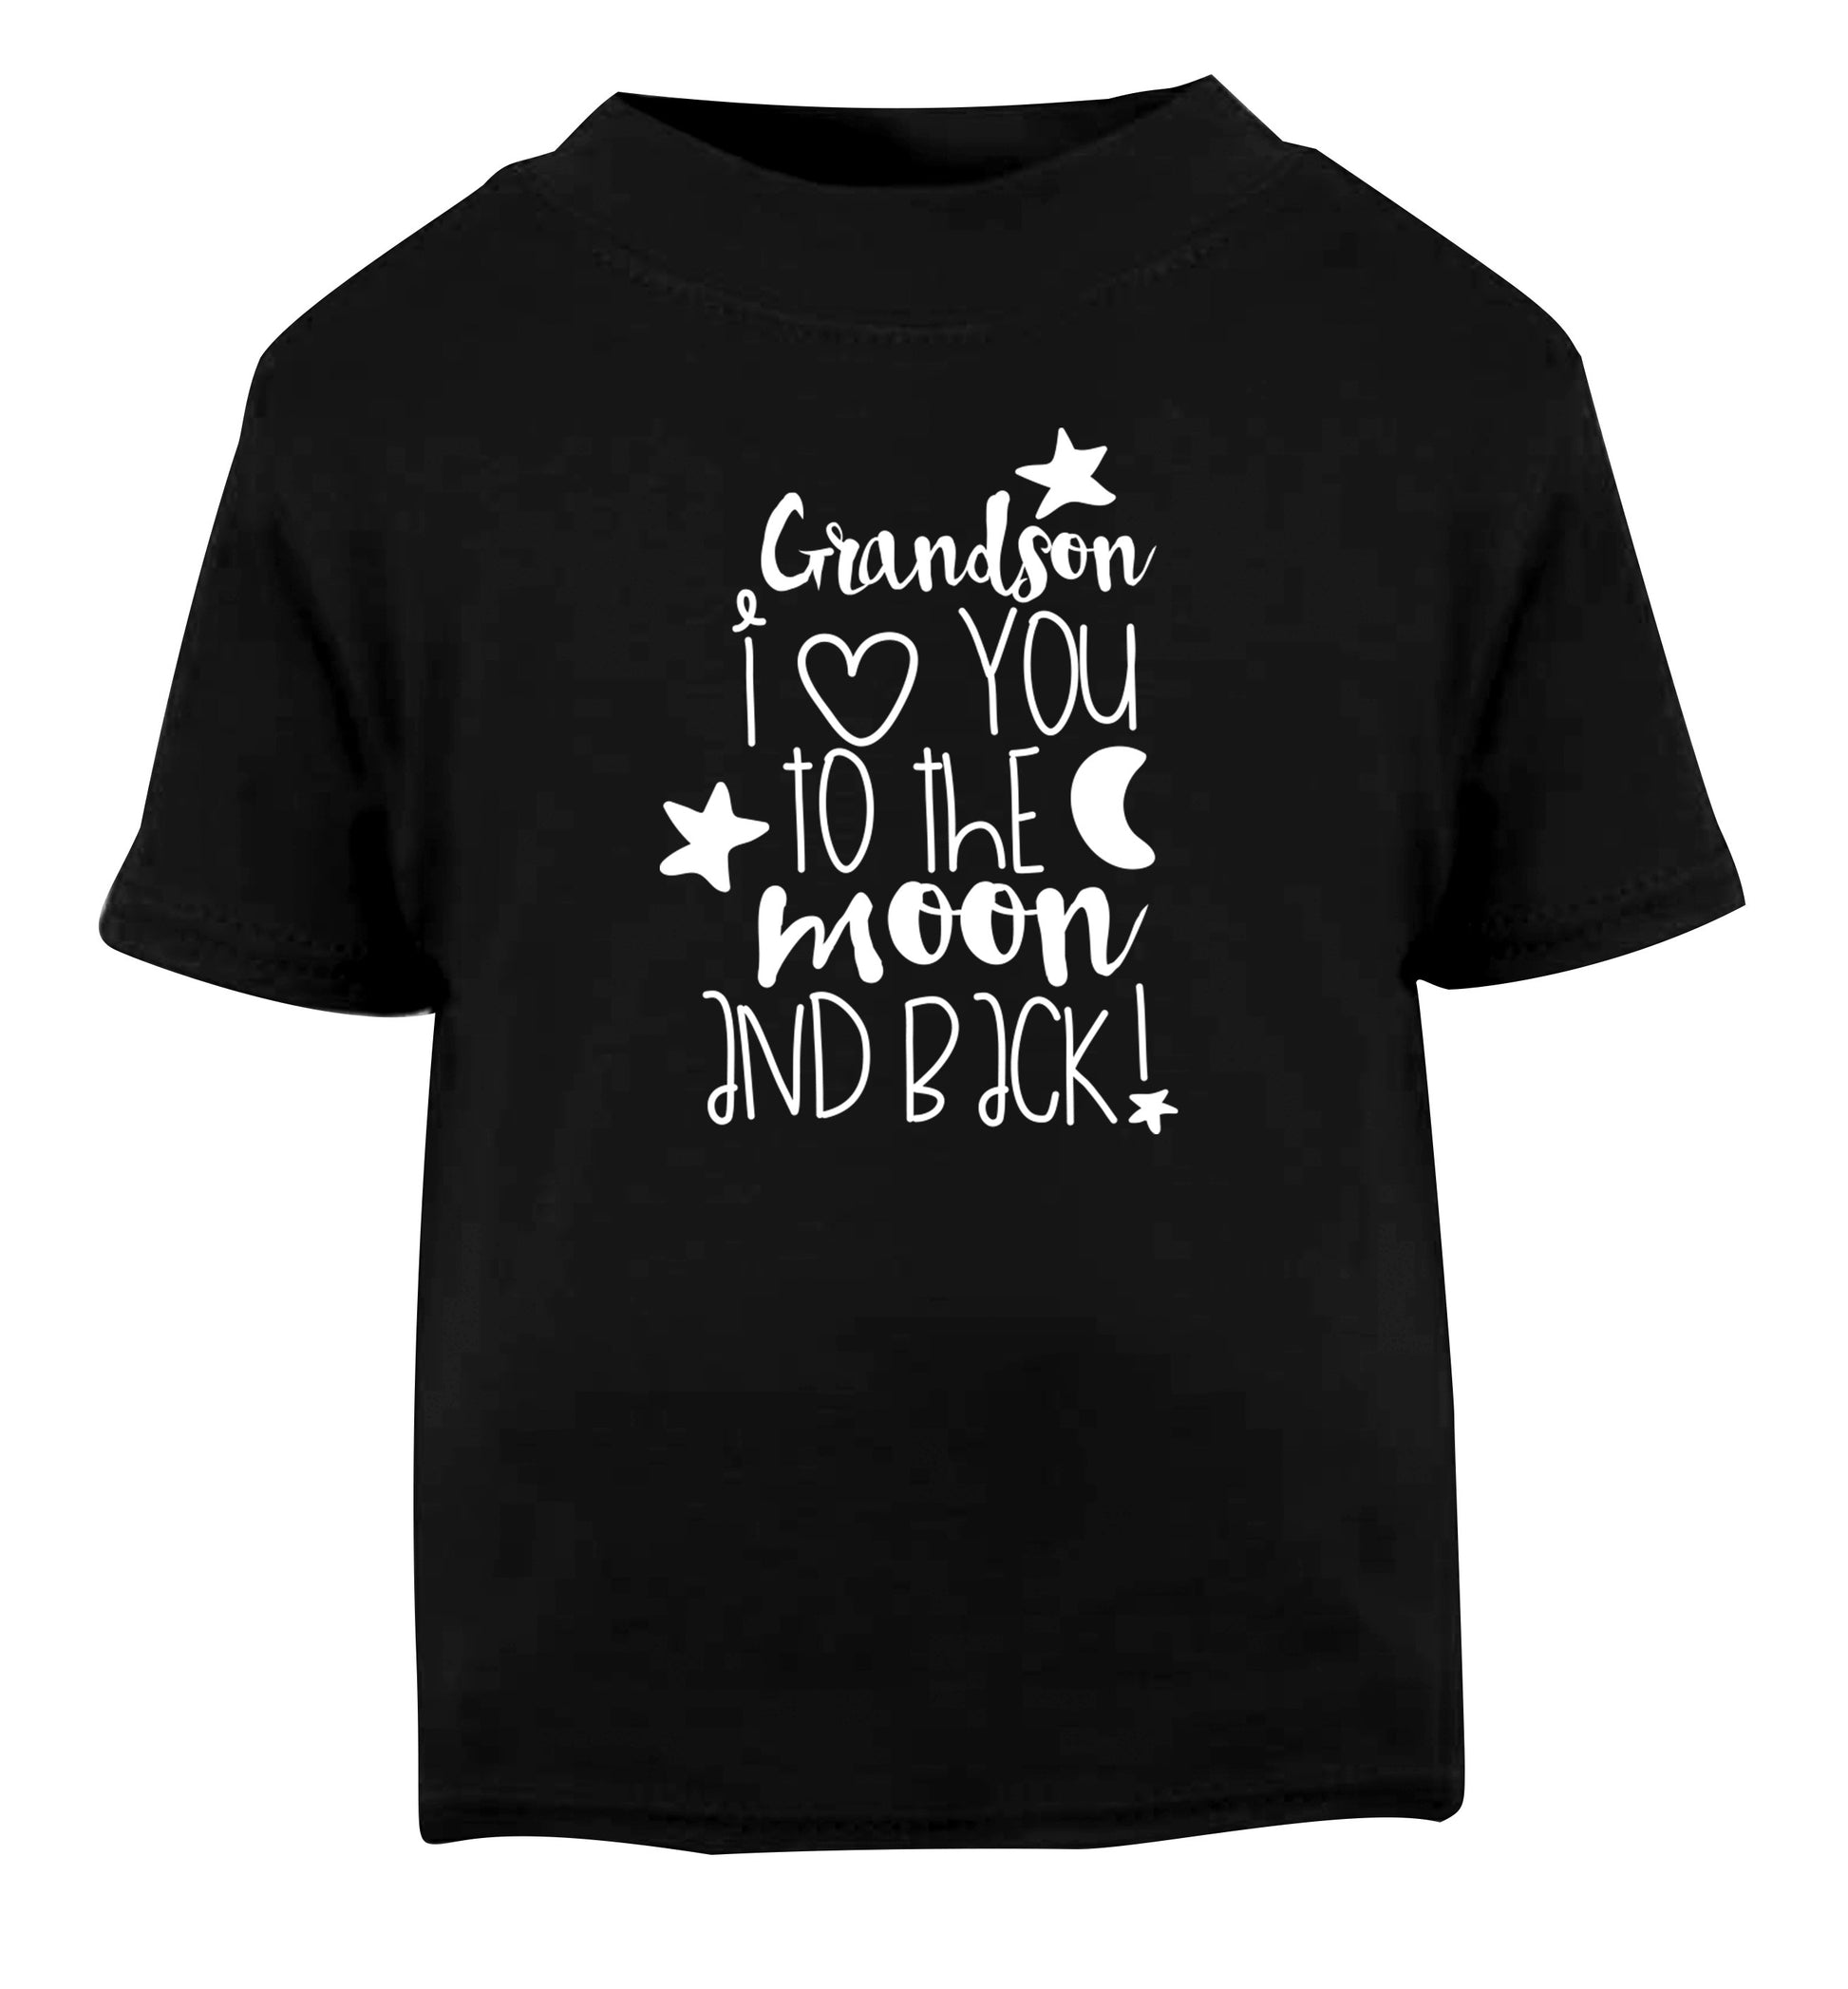 Grandson I love you to the moon and back Black Baby Toddler Tshirt 2 years